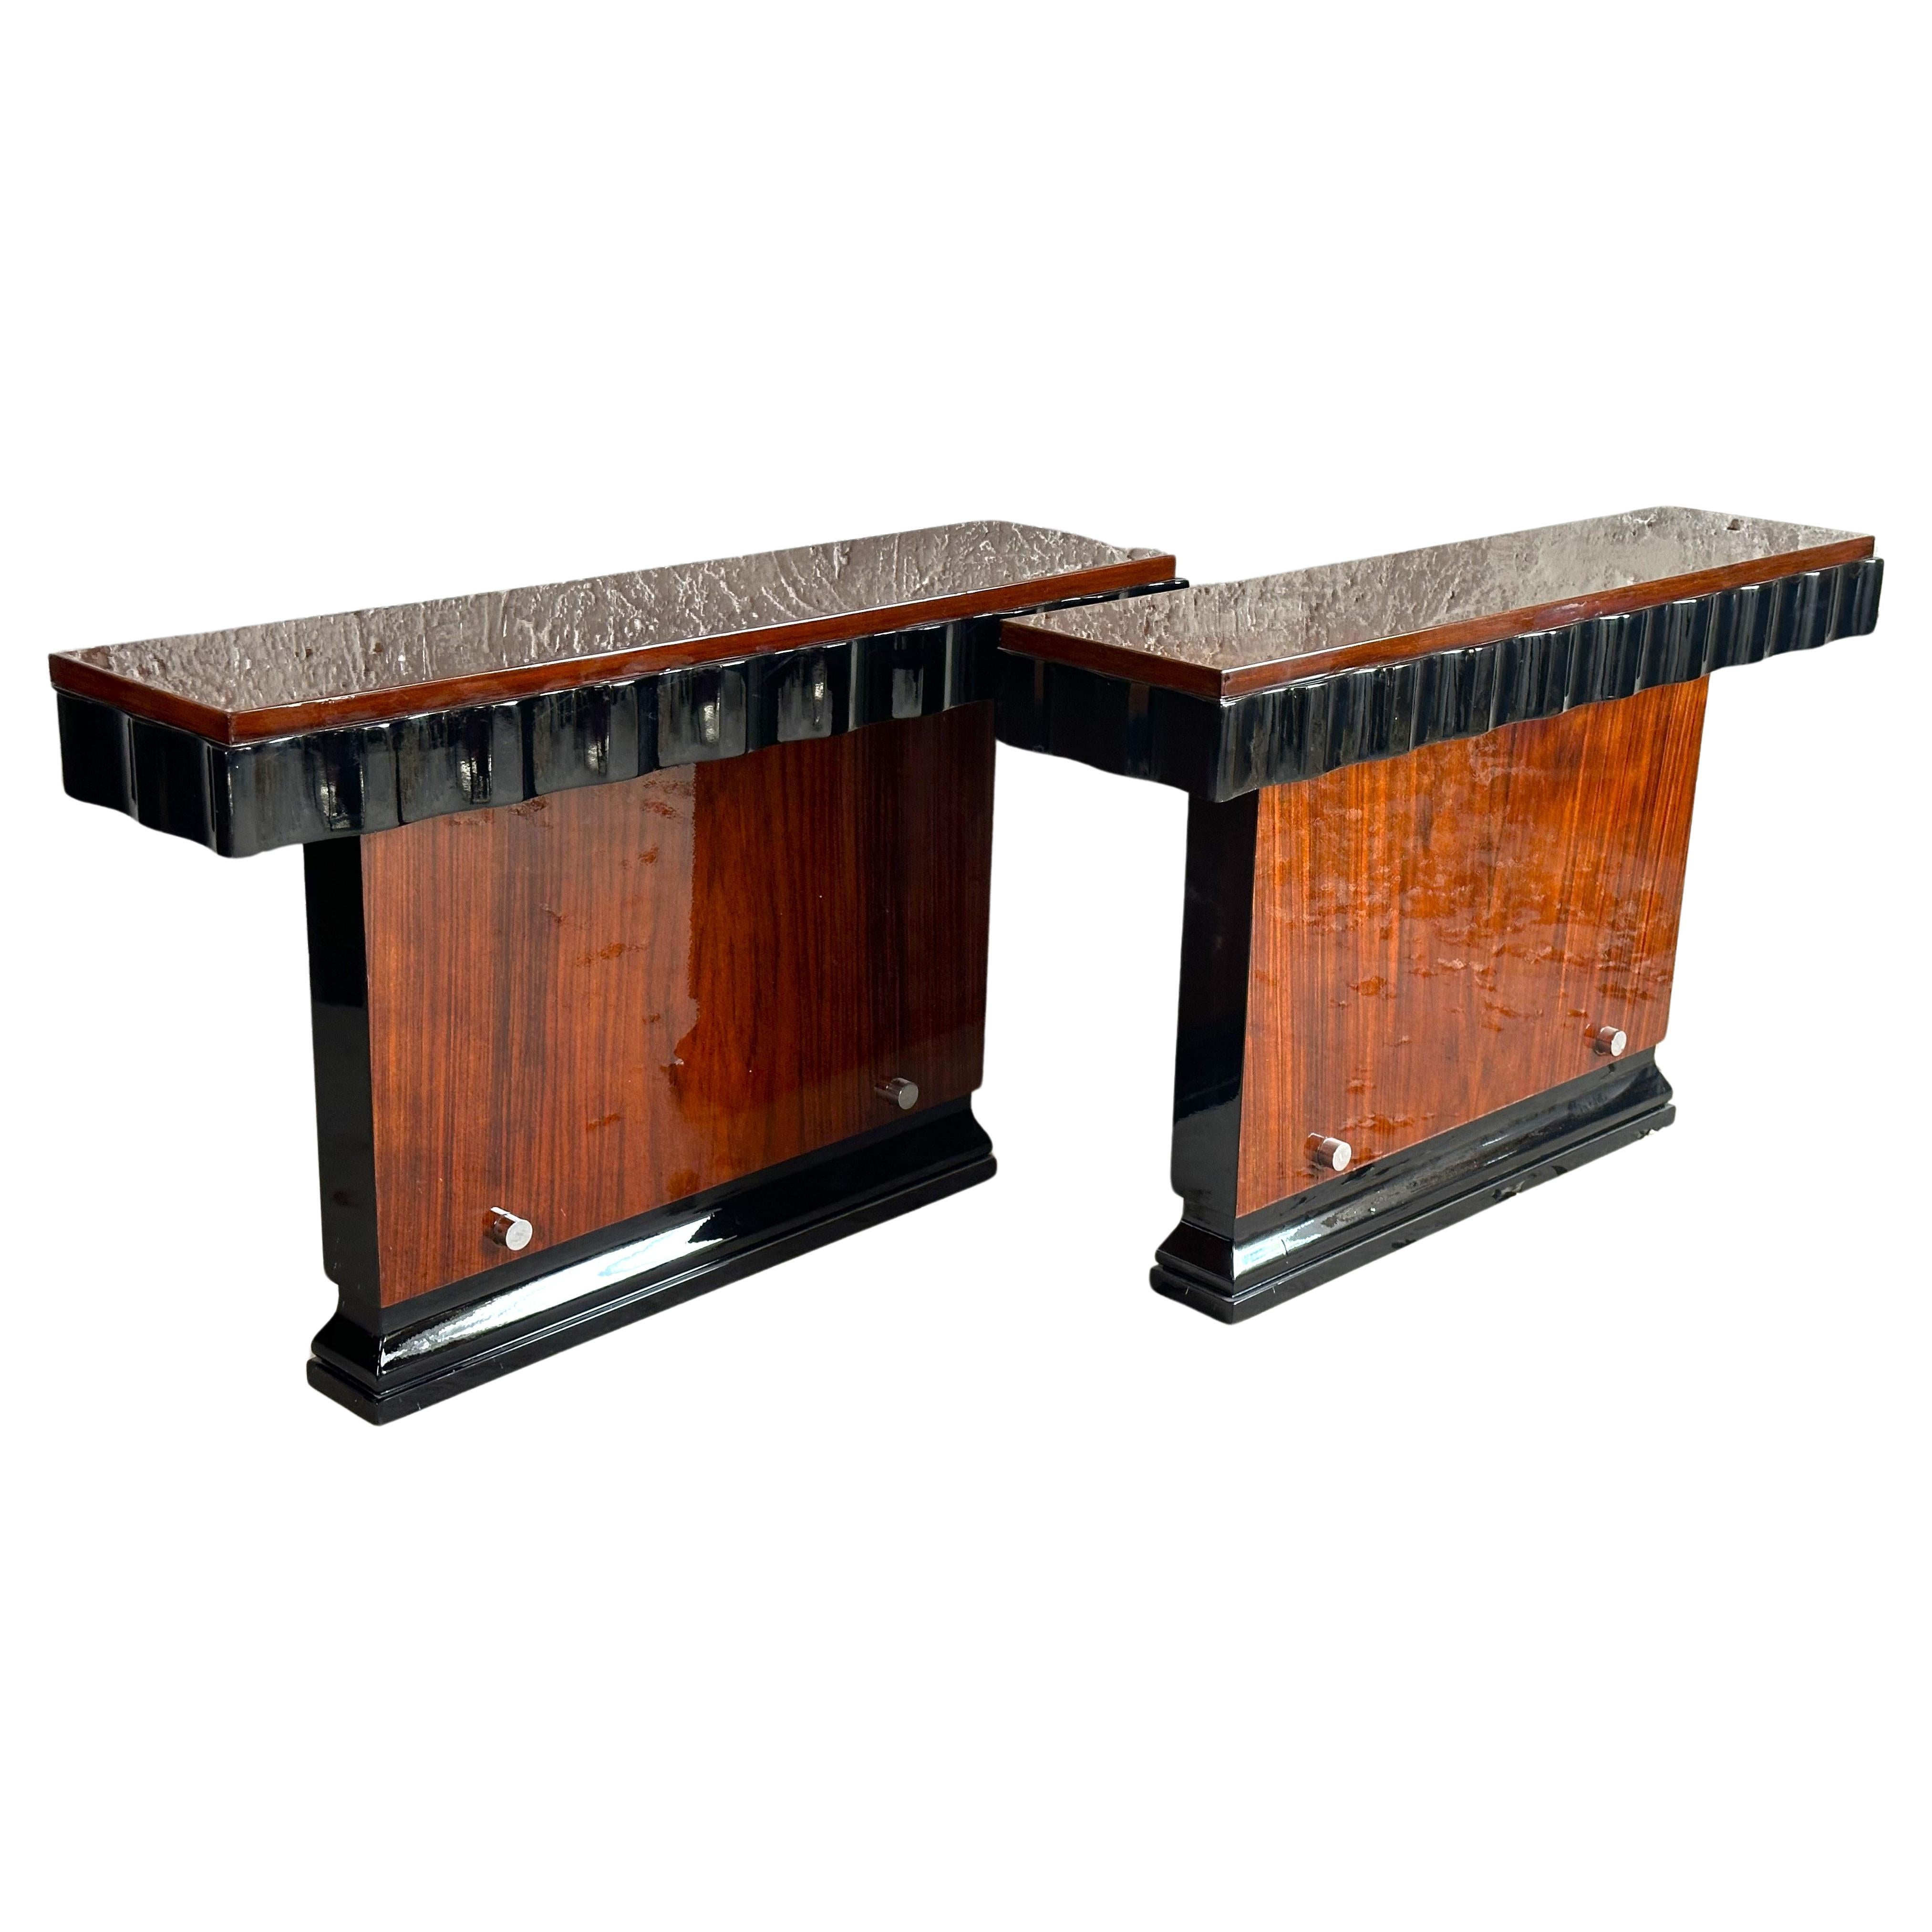 Art Deco Modernist Pair of Console Tables by Kristian Krass, France 1935 For Sale